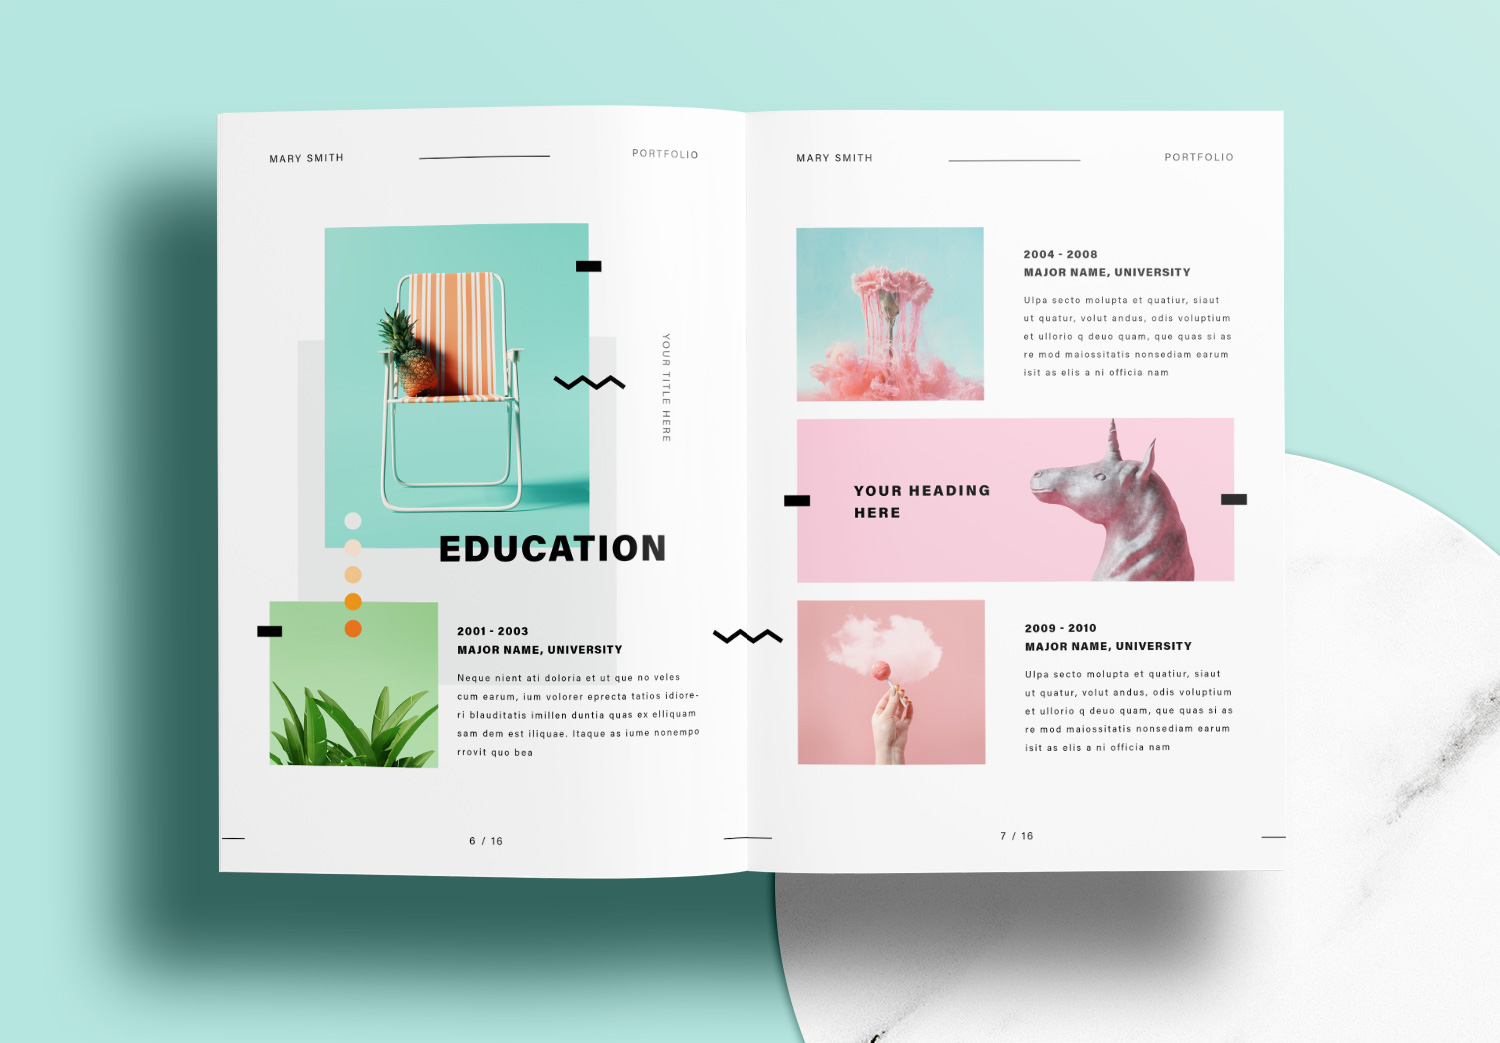 Free InDesign Portfolio Layout Templates with Green Design Elements